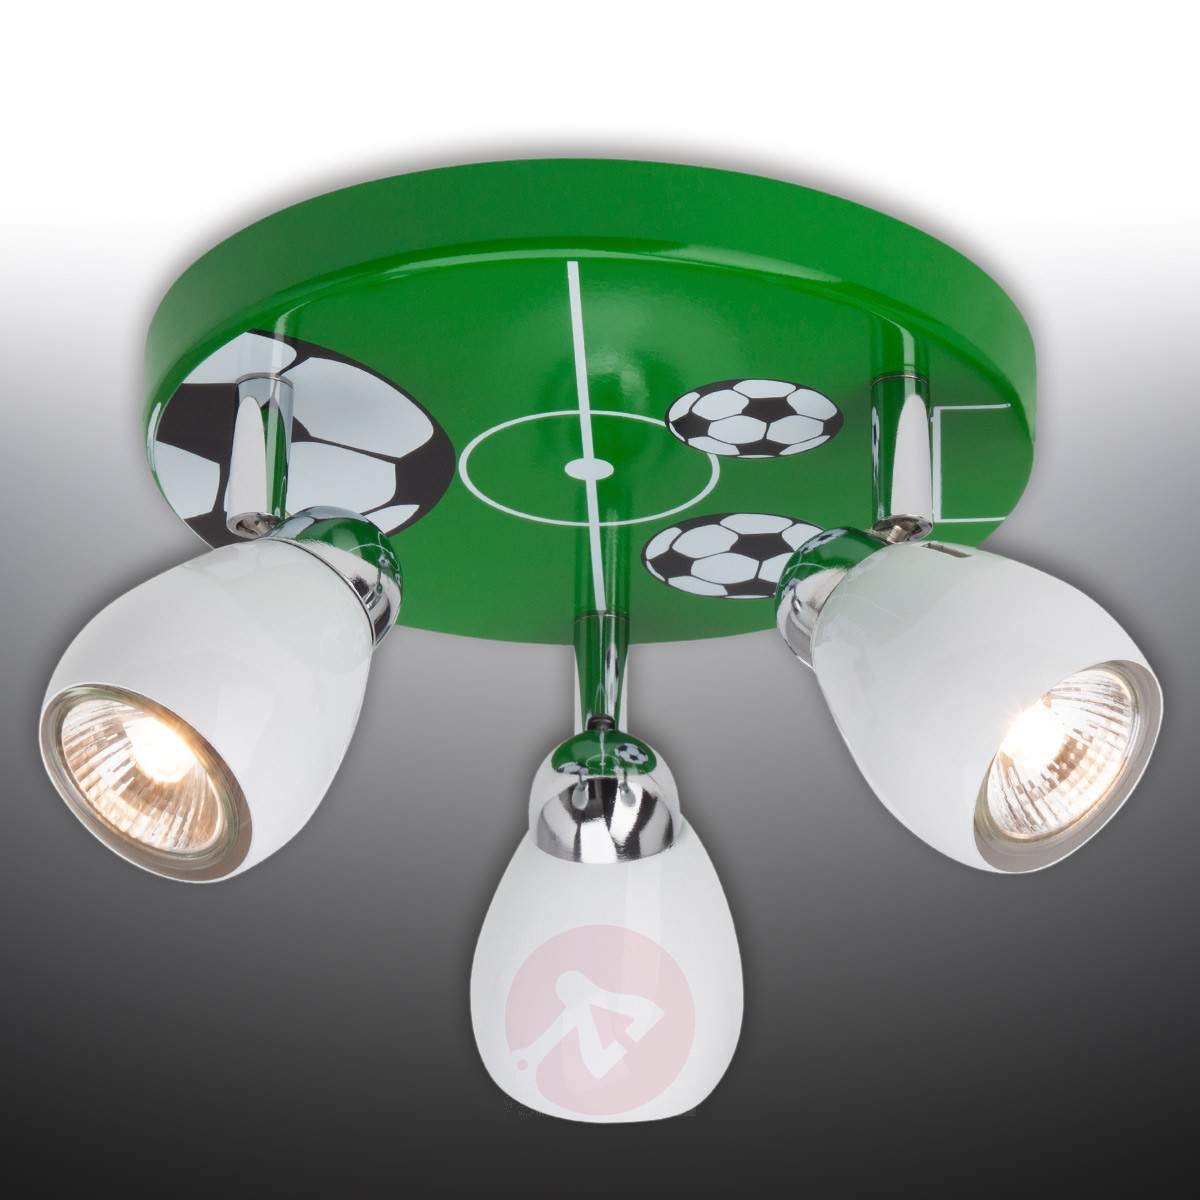 Permalink to Childrens Football Ceiling Light